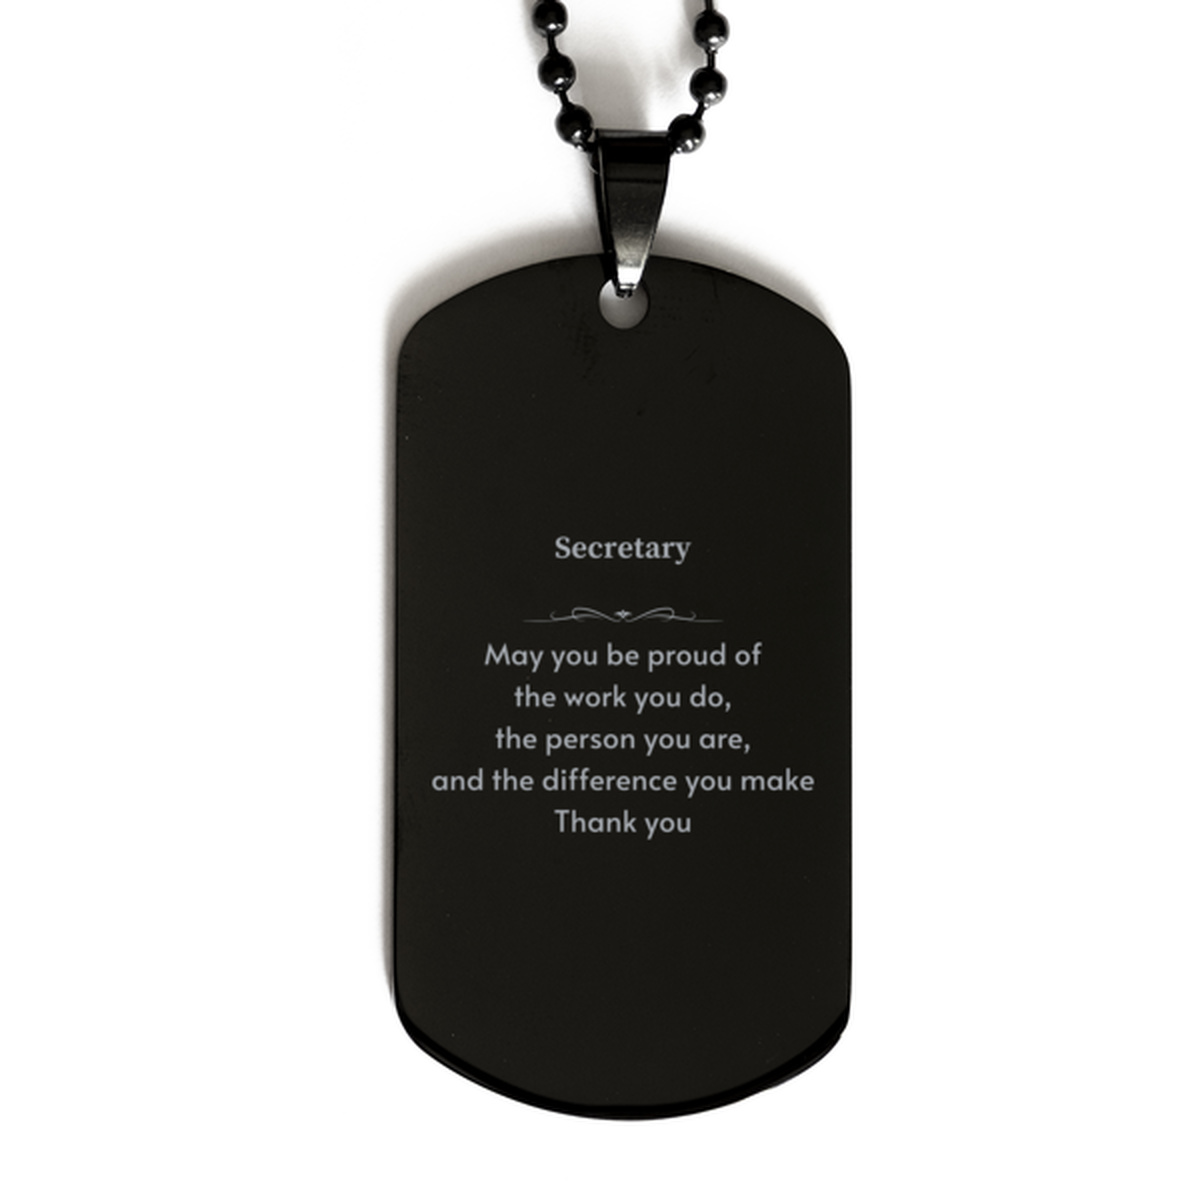 Heartwarming Black Dog Tag Retirement Coworkers Gifts for Secretary, Secretary May You be proud of the work you do, the person you are Gifts for Boss Men Women Friends